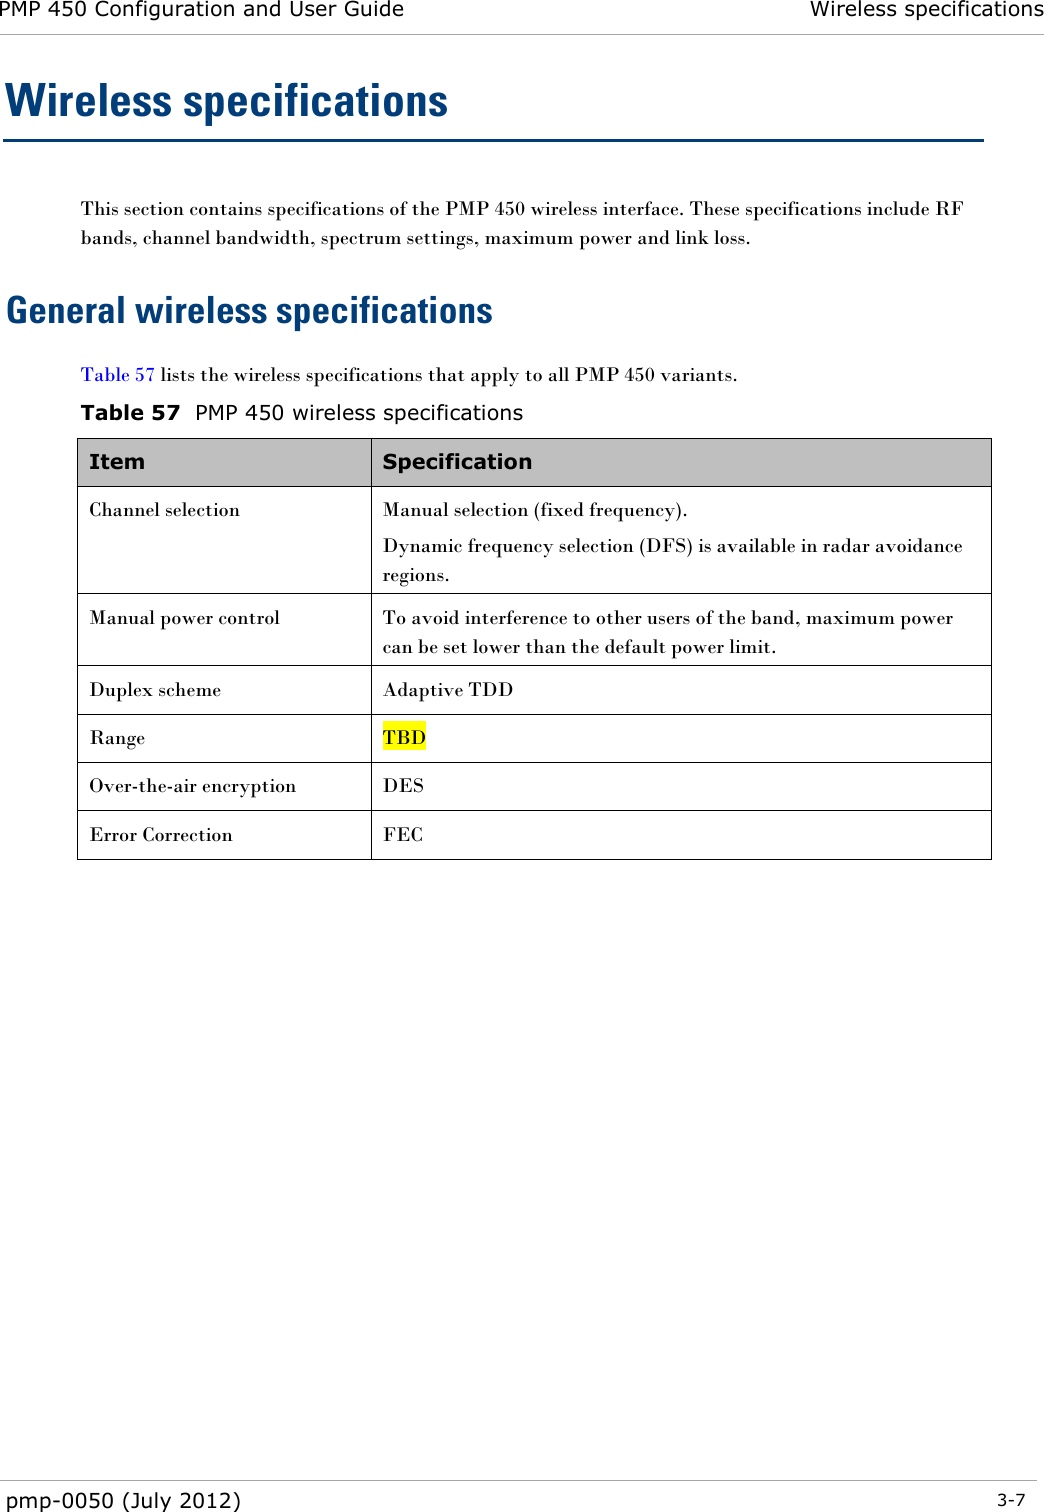 PMP 450 Configuration and User Guide Wireless specifications  pmp-0050 (July 2012)  3-7  Wireless specifications This section contains specifications of the PMP 450 wireless interface. These specifications include RF bands, channel bandwidth, spectrum settings, maximum power and link loss. General wireless specifications Table 57 lists the wireless specifications that apply to all PMP 450 variants.  Table 57  PMP 450 wireless specifications Item  Specification  Channel selection Manual selection (fixed frequency). Dynamic frequency selection (DFS) is available in radar avoidance regions. Manual power control  To avoid interference to other users of the band, maximum power can be set lower than the default power limit. Duplex scheme Adaptive TDD Range TBD Over-the-air encryption DES Error Correction FEC     